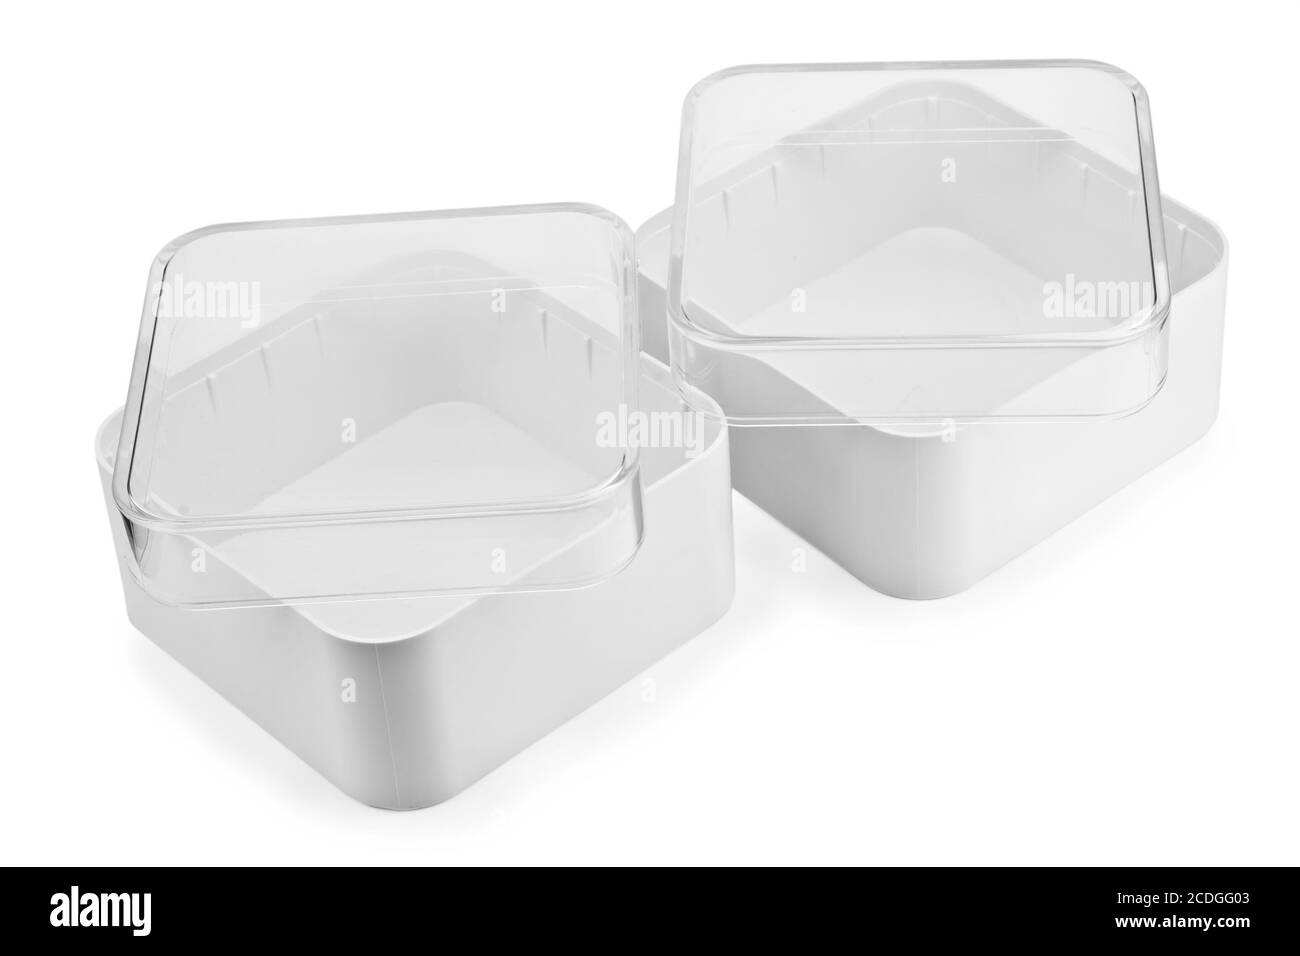 https://c8.alamy.com/comp/2CDGG03/isolated-small-white-plastic-boxes-2CDGG03.jpg